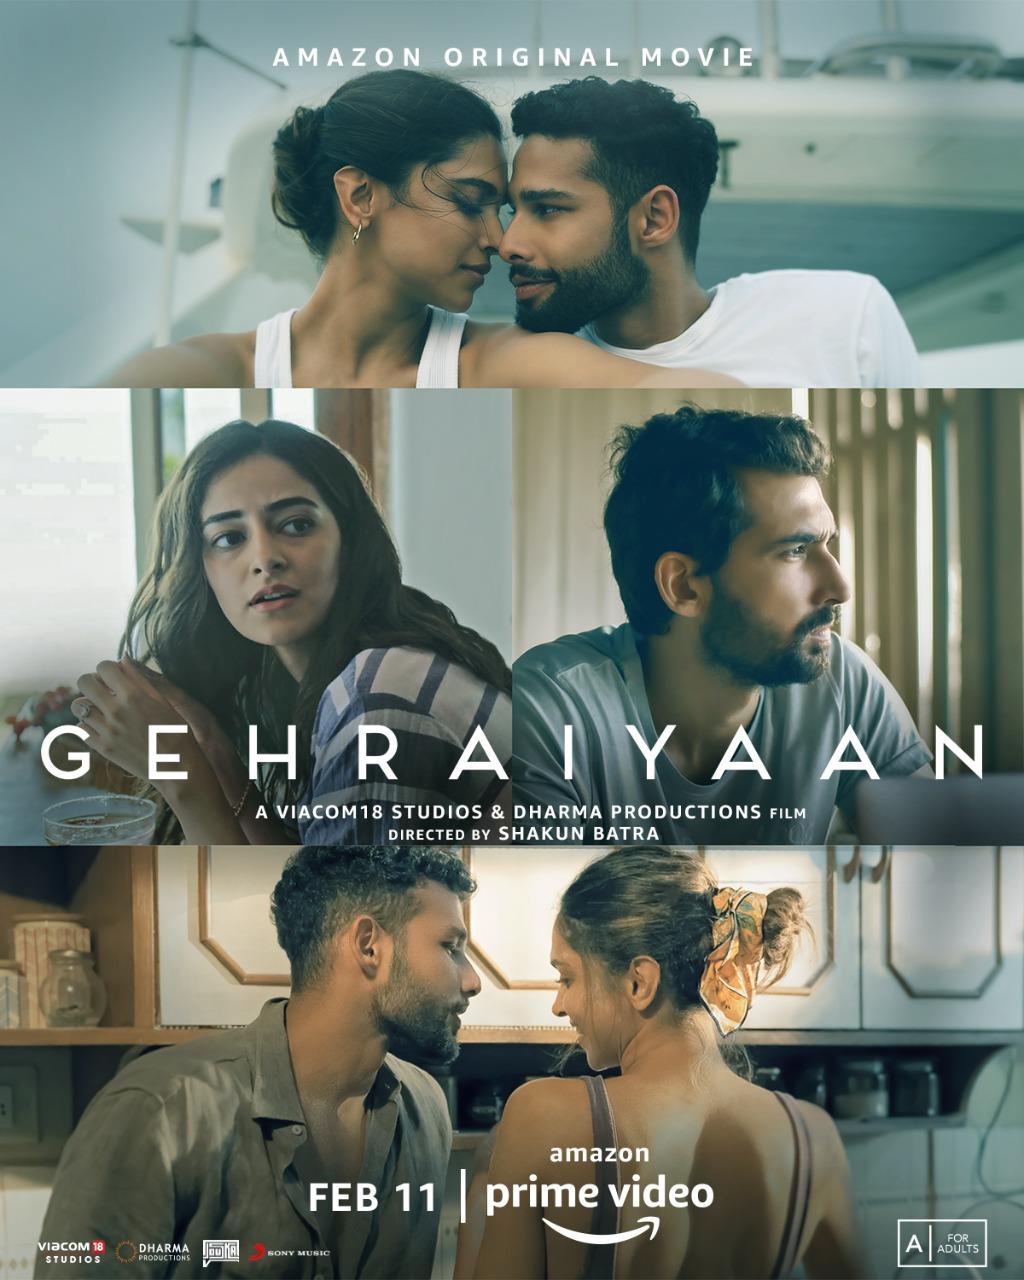 'Gehraiyaan' trailer out: Romance leads to chaos as Deepika Padukone falls for cousin Ananya Panday’s fiancé Siddhant Chaturvedi